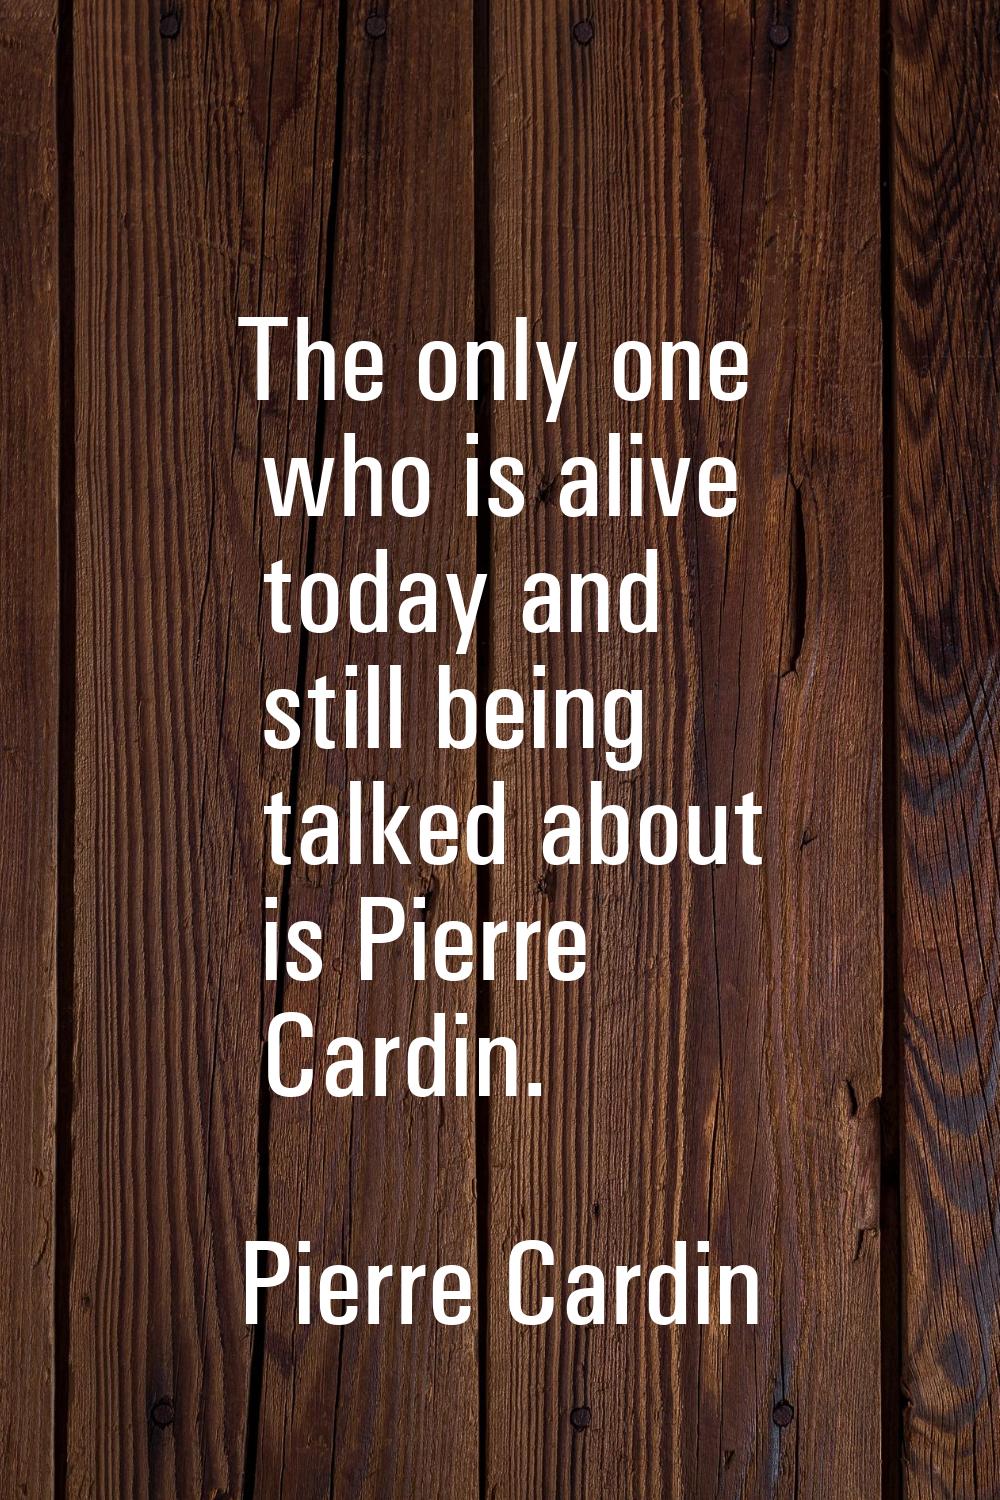 The only one who is alive today and still being talked about is Pierre Cardin.